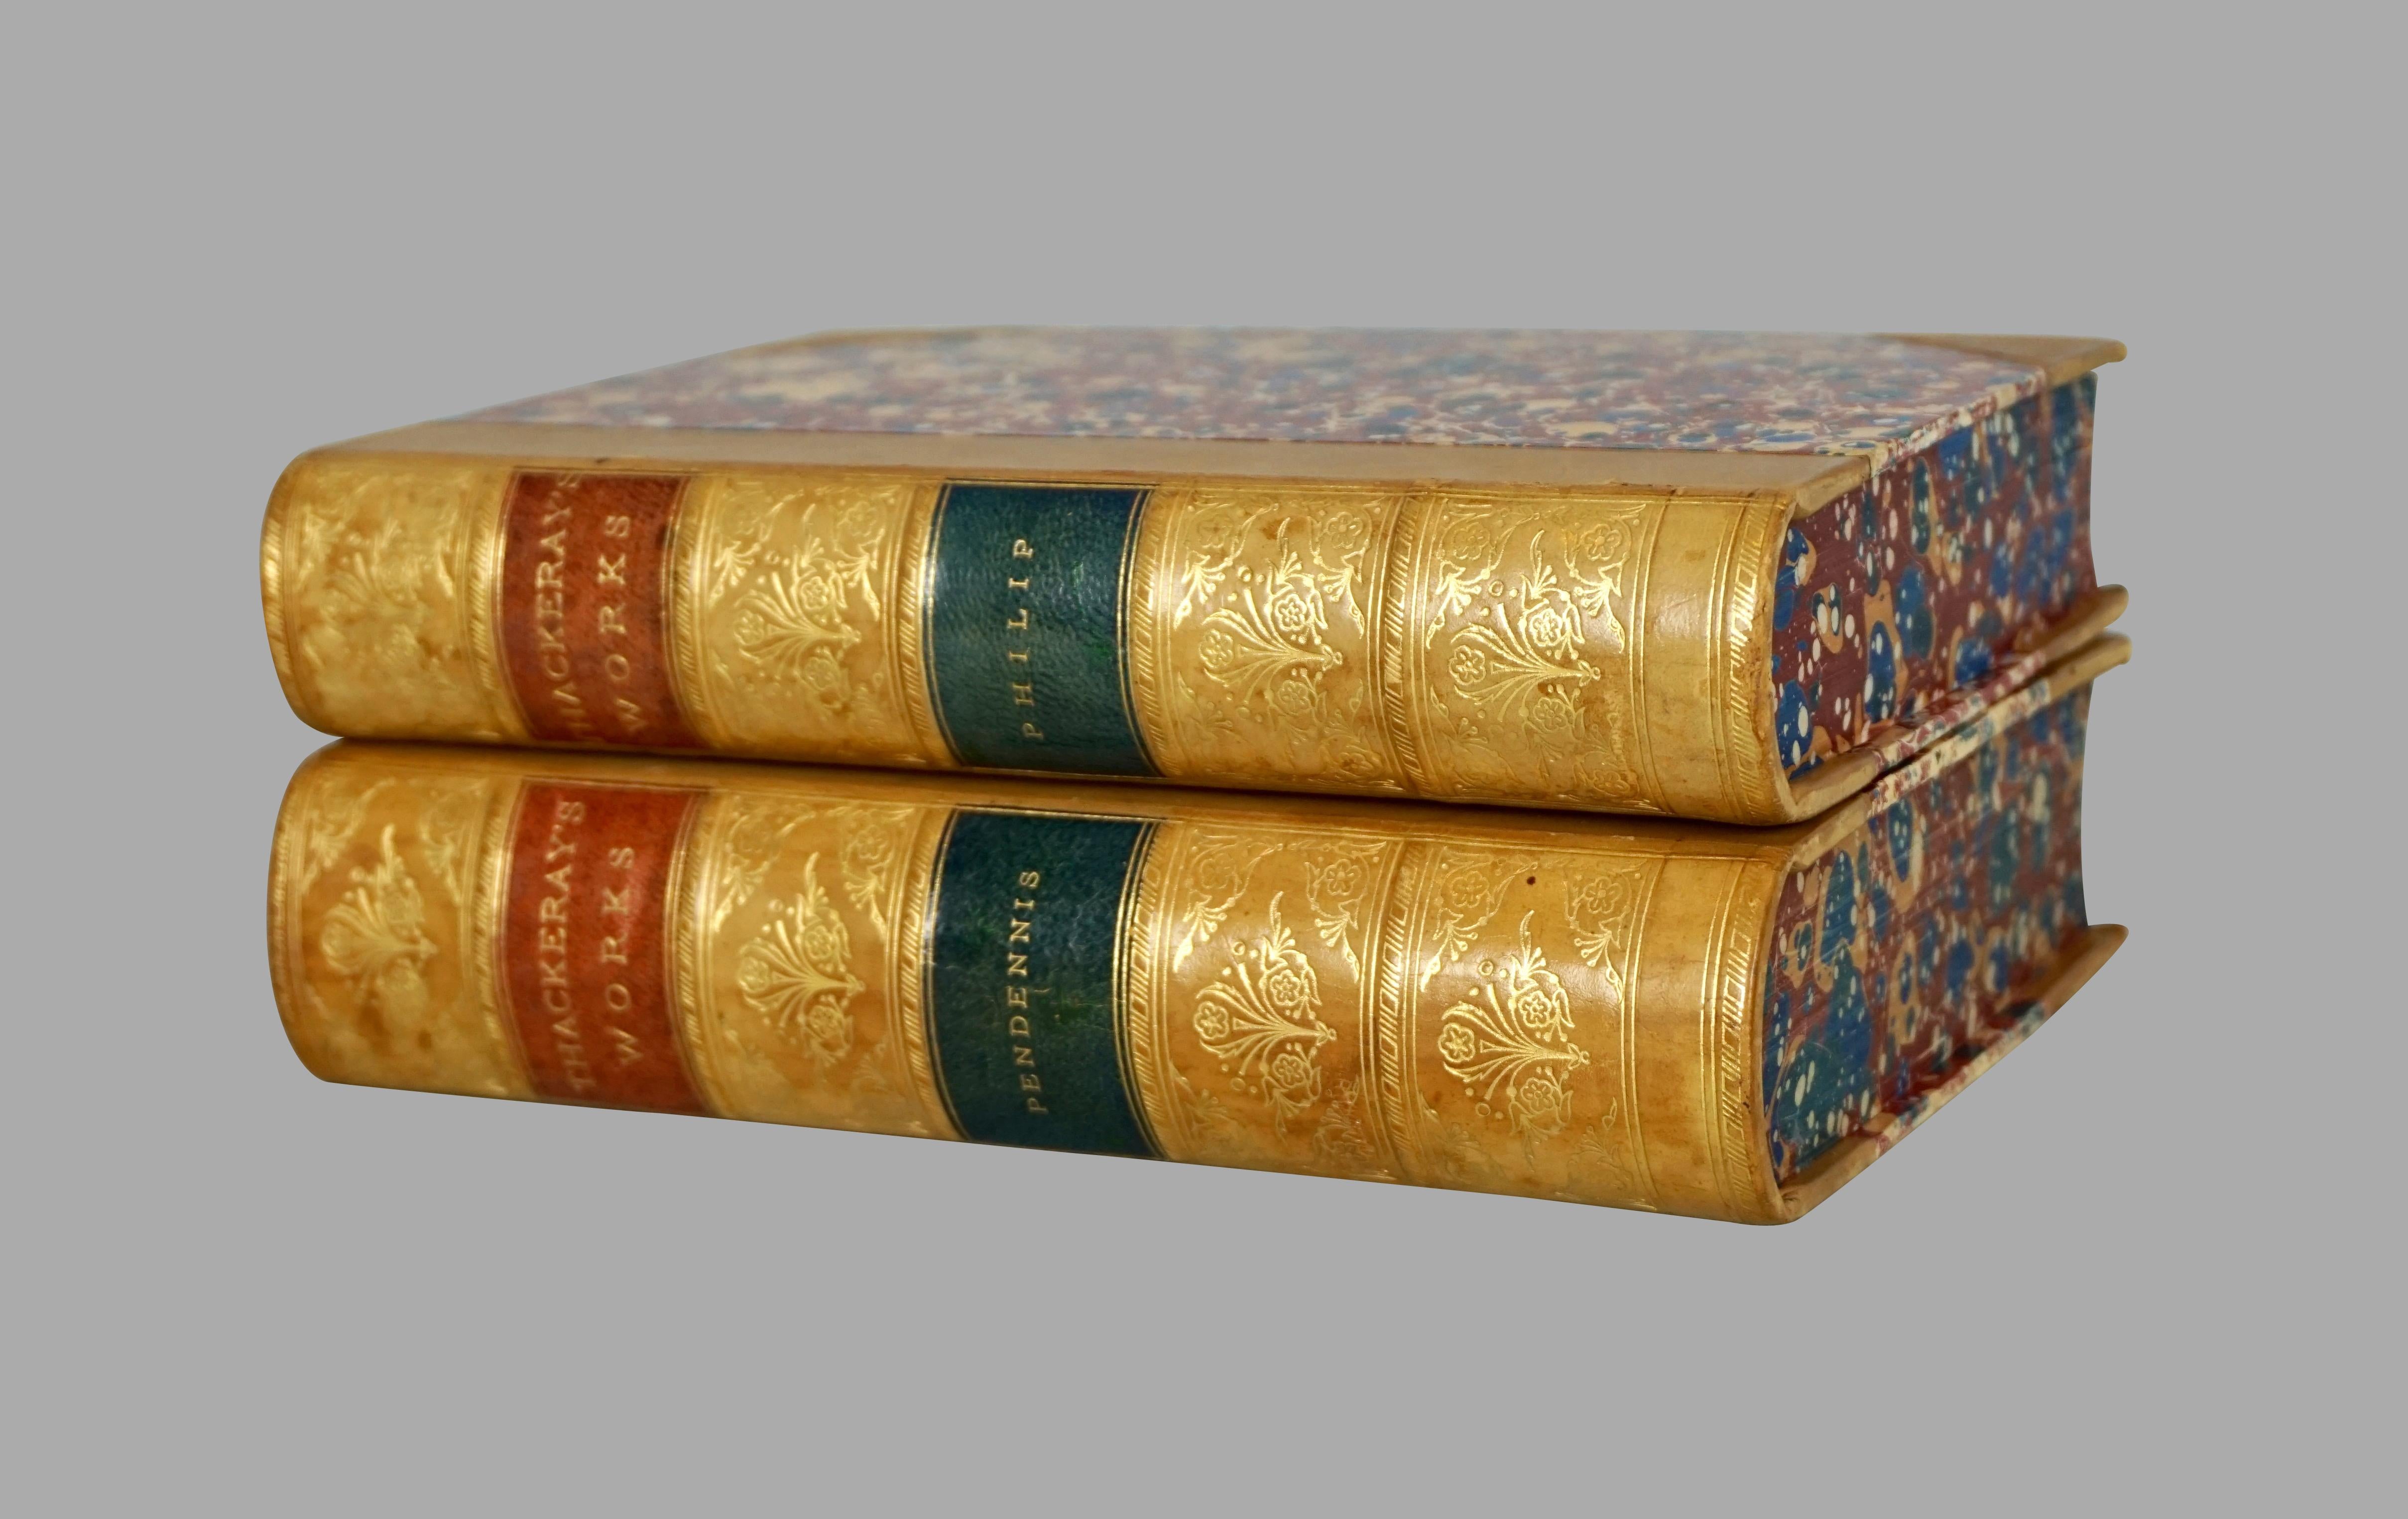 A complete set of 12 leather bound and marbleized paper works of William Thackeray, the tan gilt tooled raised leather spines with red and black labels, published by Smith Elder & Company, London and J.R. Lippincott & Co. Philadelphia, 1879. An